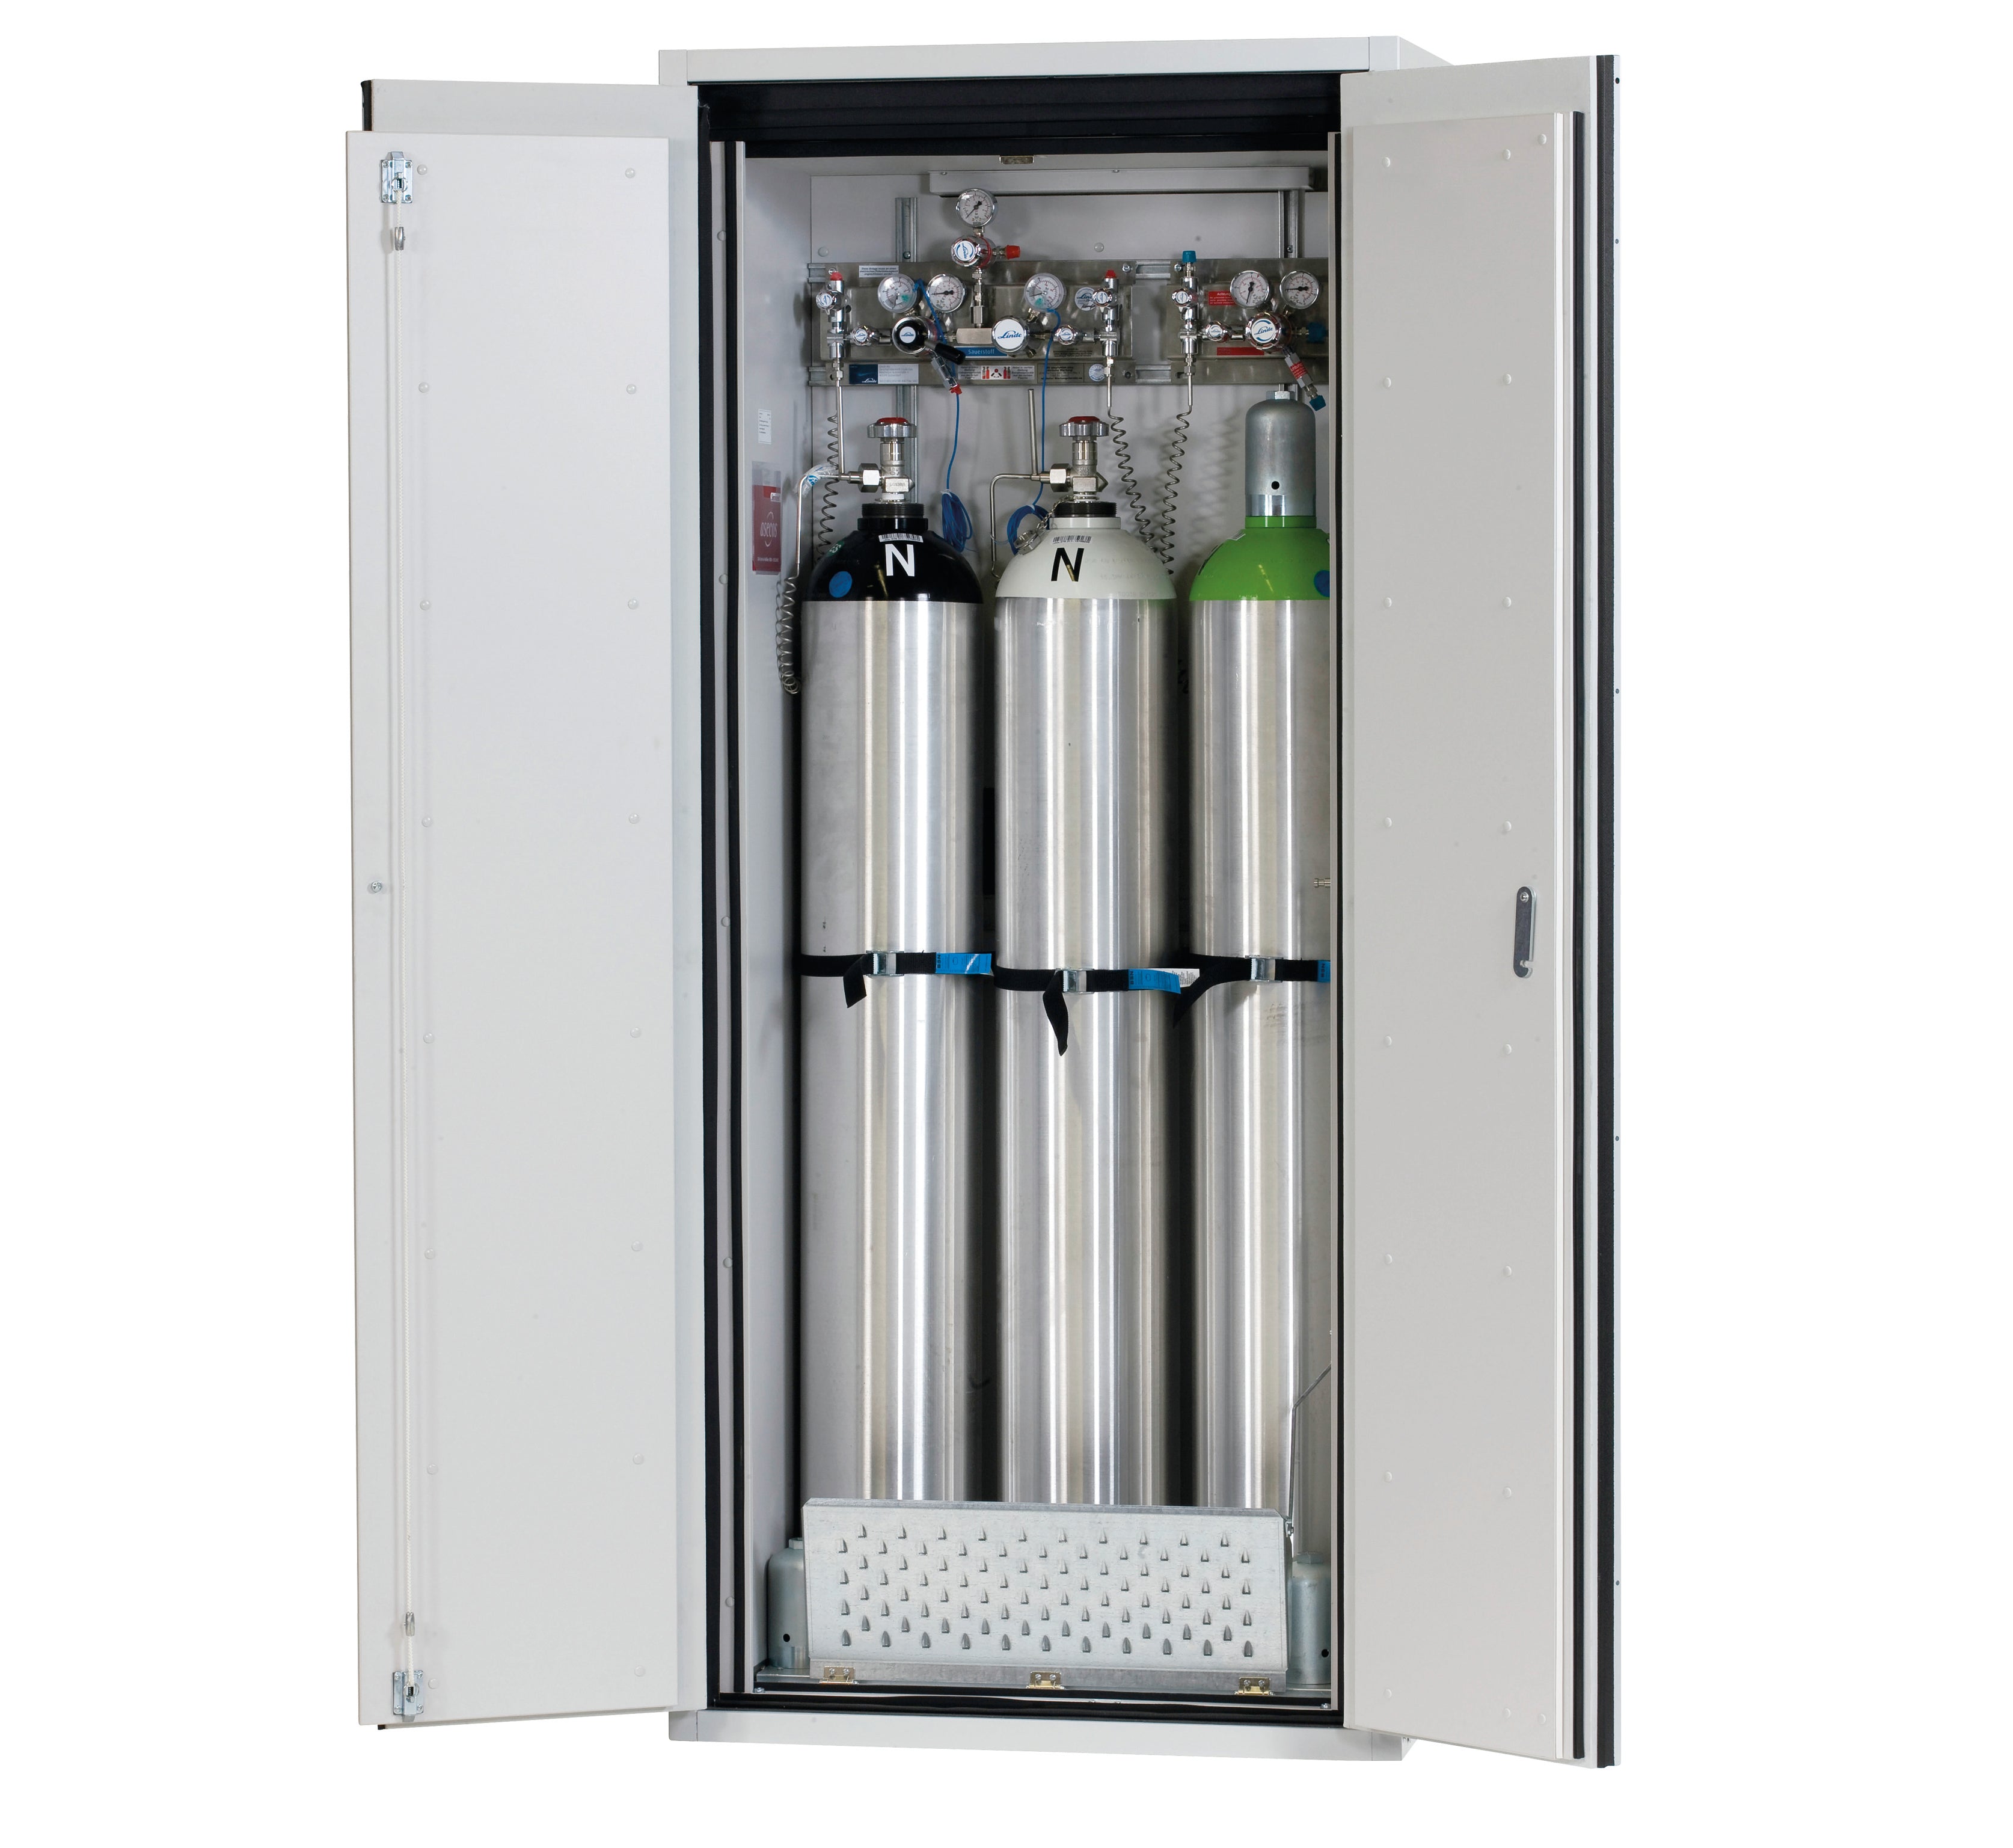 Type 90 compressed gas bottle cabinet G-ULTIMATE-90 model G90.205.090 in light gray RAL 7035 with comfortable interior fittings for 3x compressed gas bottles of 50 liters each